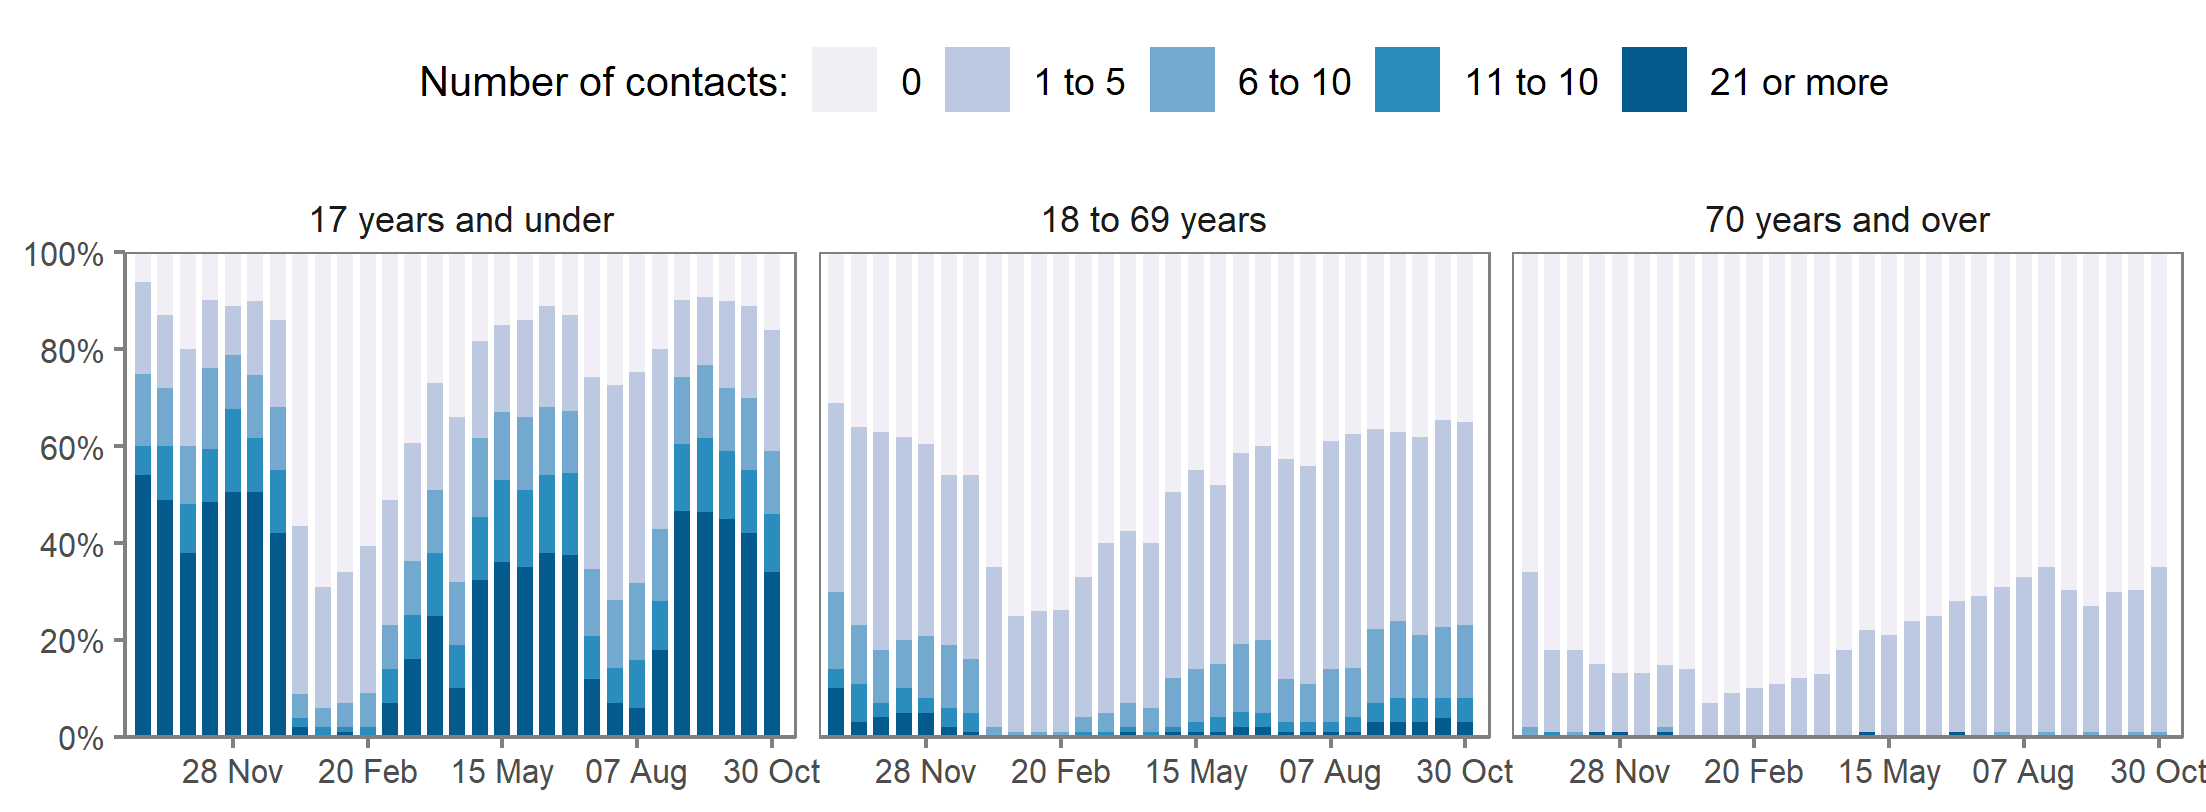 The proportions of school-age children reporting each category of number of physical contacts (0, 1 to 5, 6 to 10, 11 to 20, and 21 or more contacts) is shown in Figure 1.  Children appear to have consistently had more physical contacts with those under 18 than with those aged 18-69 or over 70s.  Each bar represents one two-week period, denoted by the end date of that period. For example, 30 October 2021 denotes the estimate relating to 17 October to 30 October 2021.